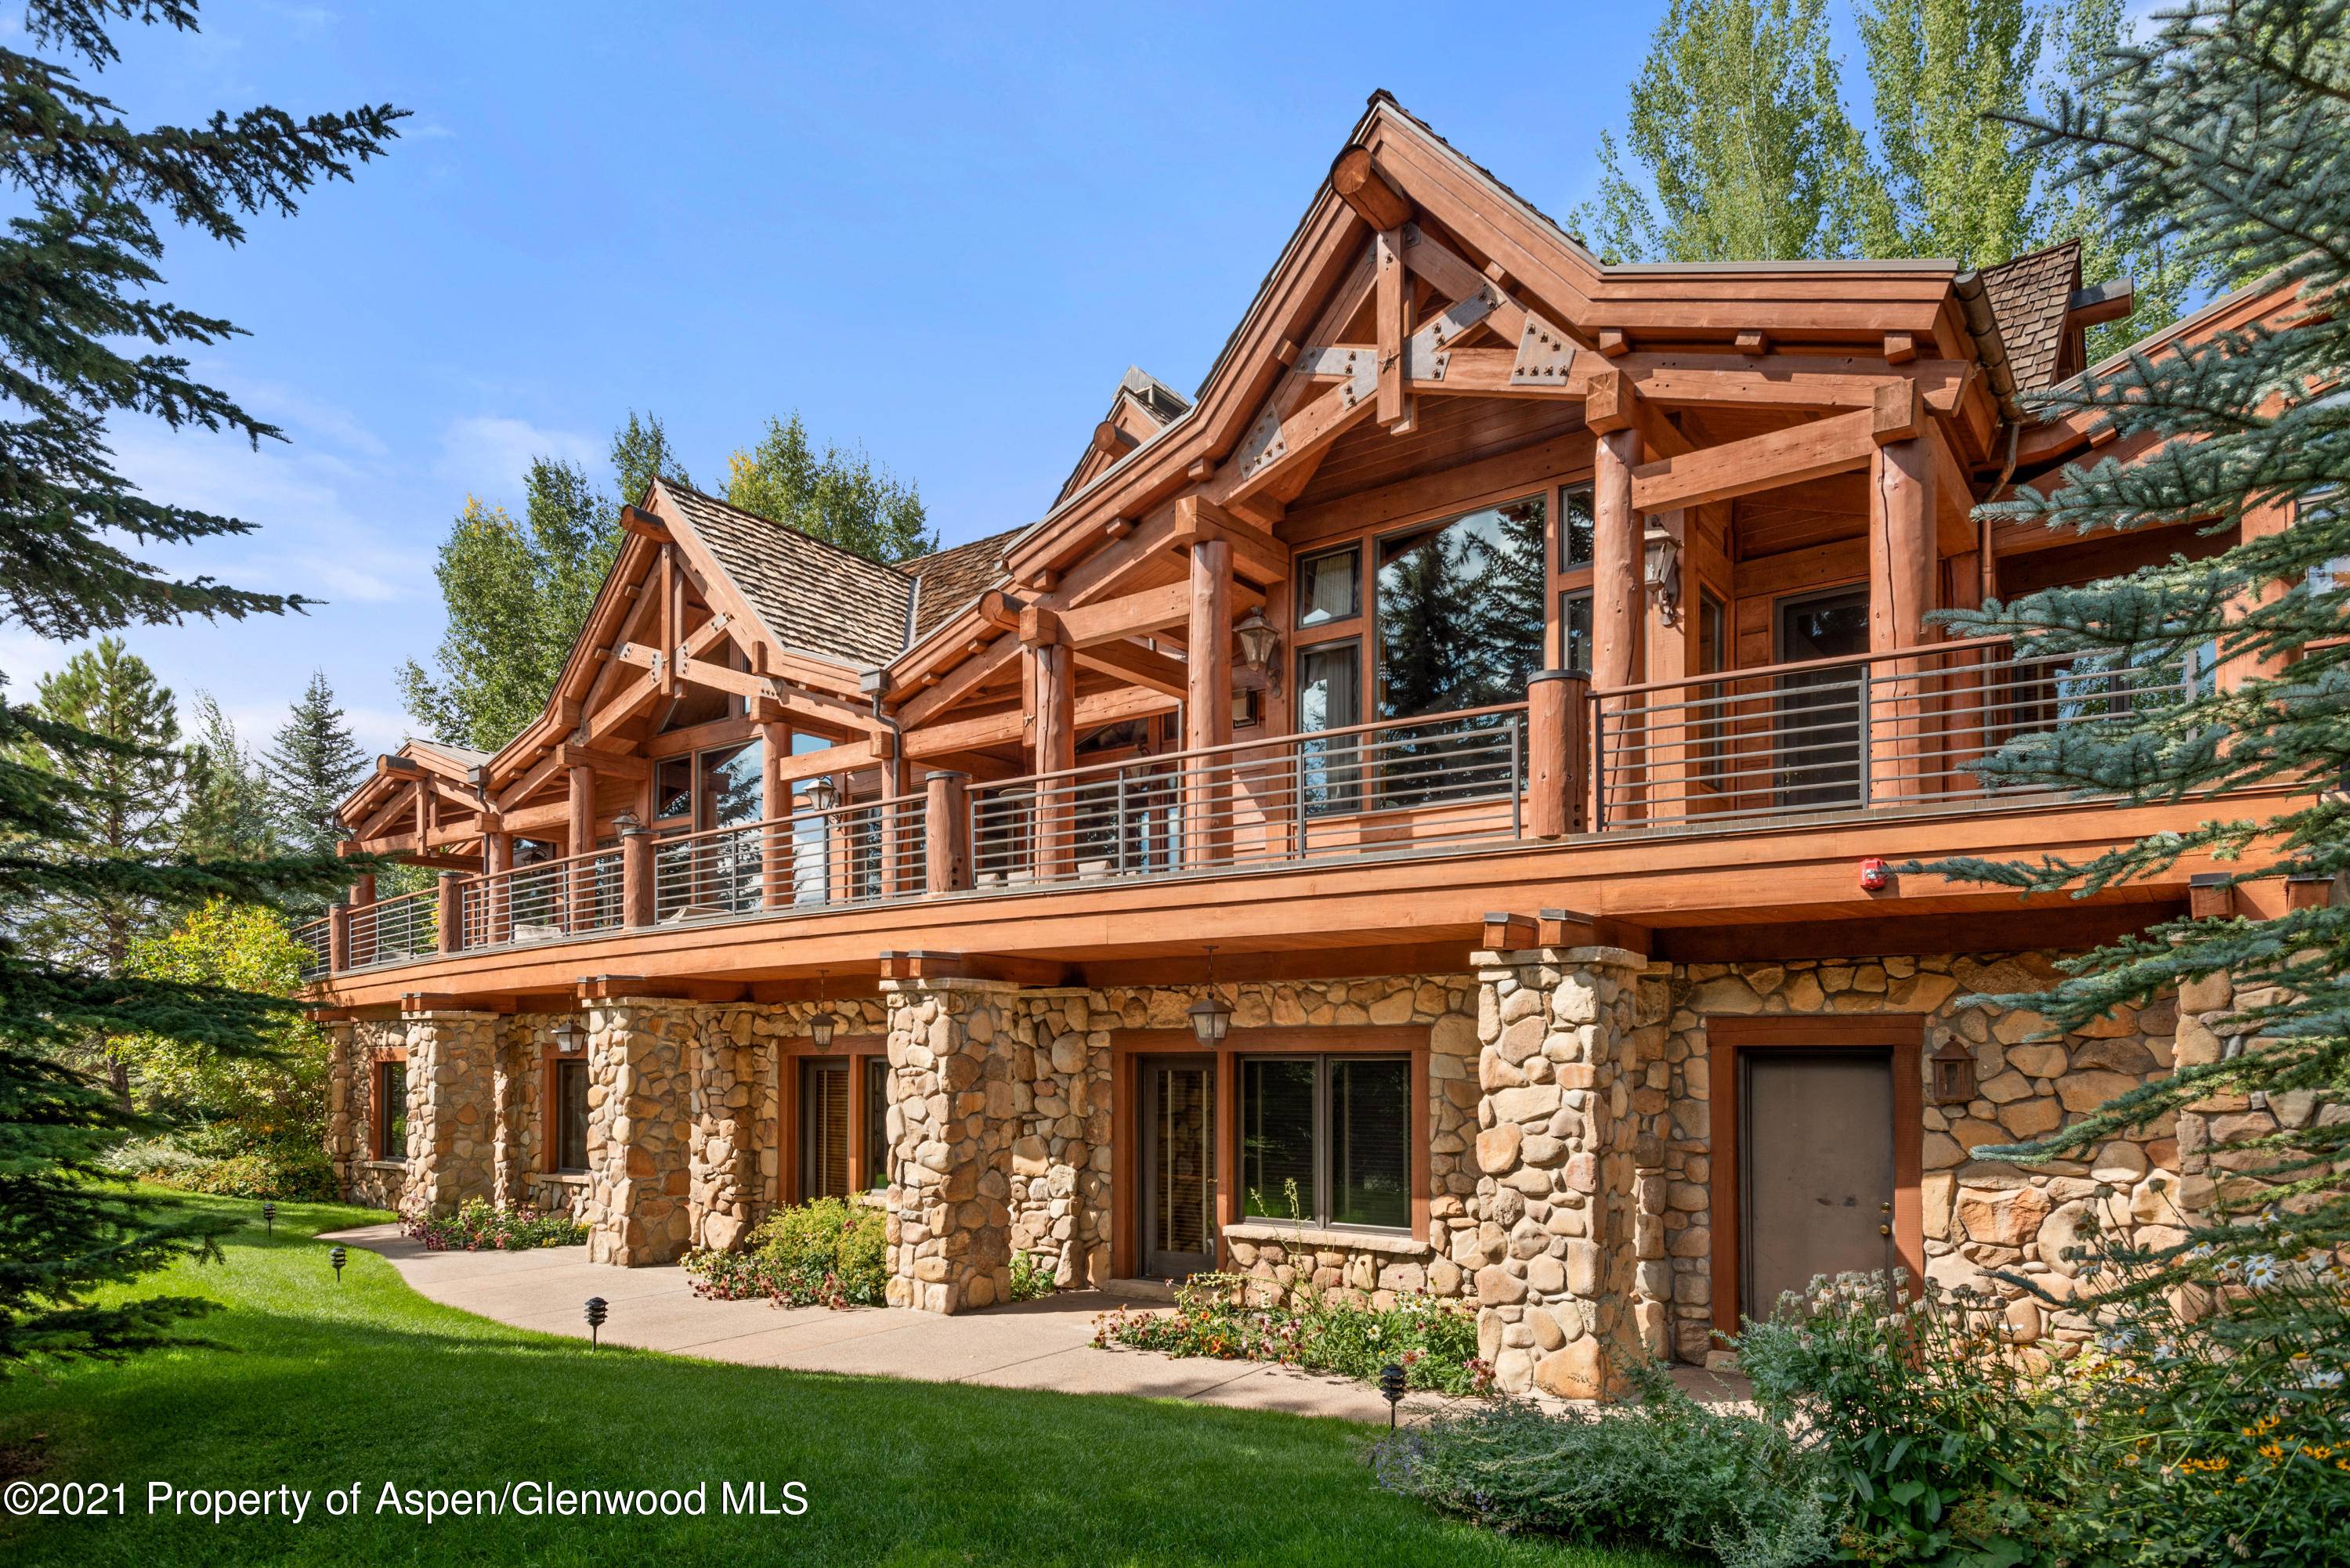 A rare opportunity to rent an expansive mountain estate on Aspen's prestigious Willoughby Way, now offered for monthly and weekly rental.